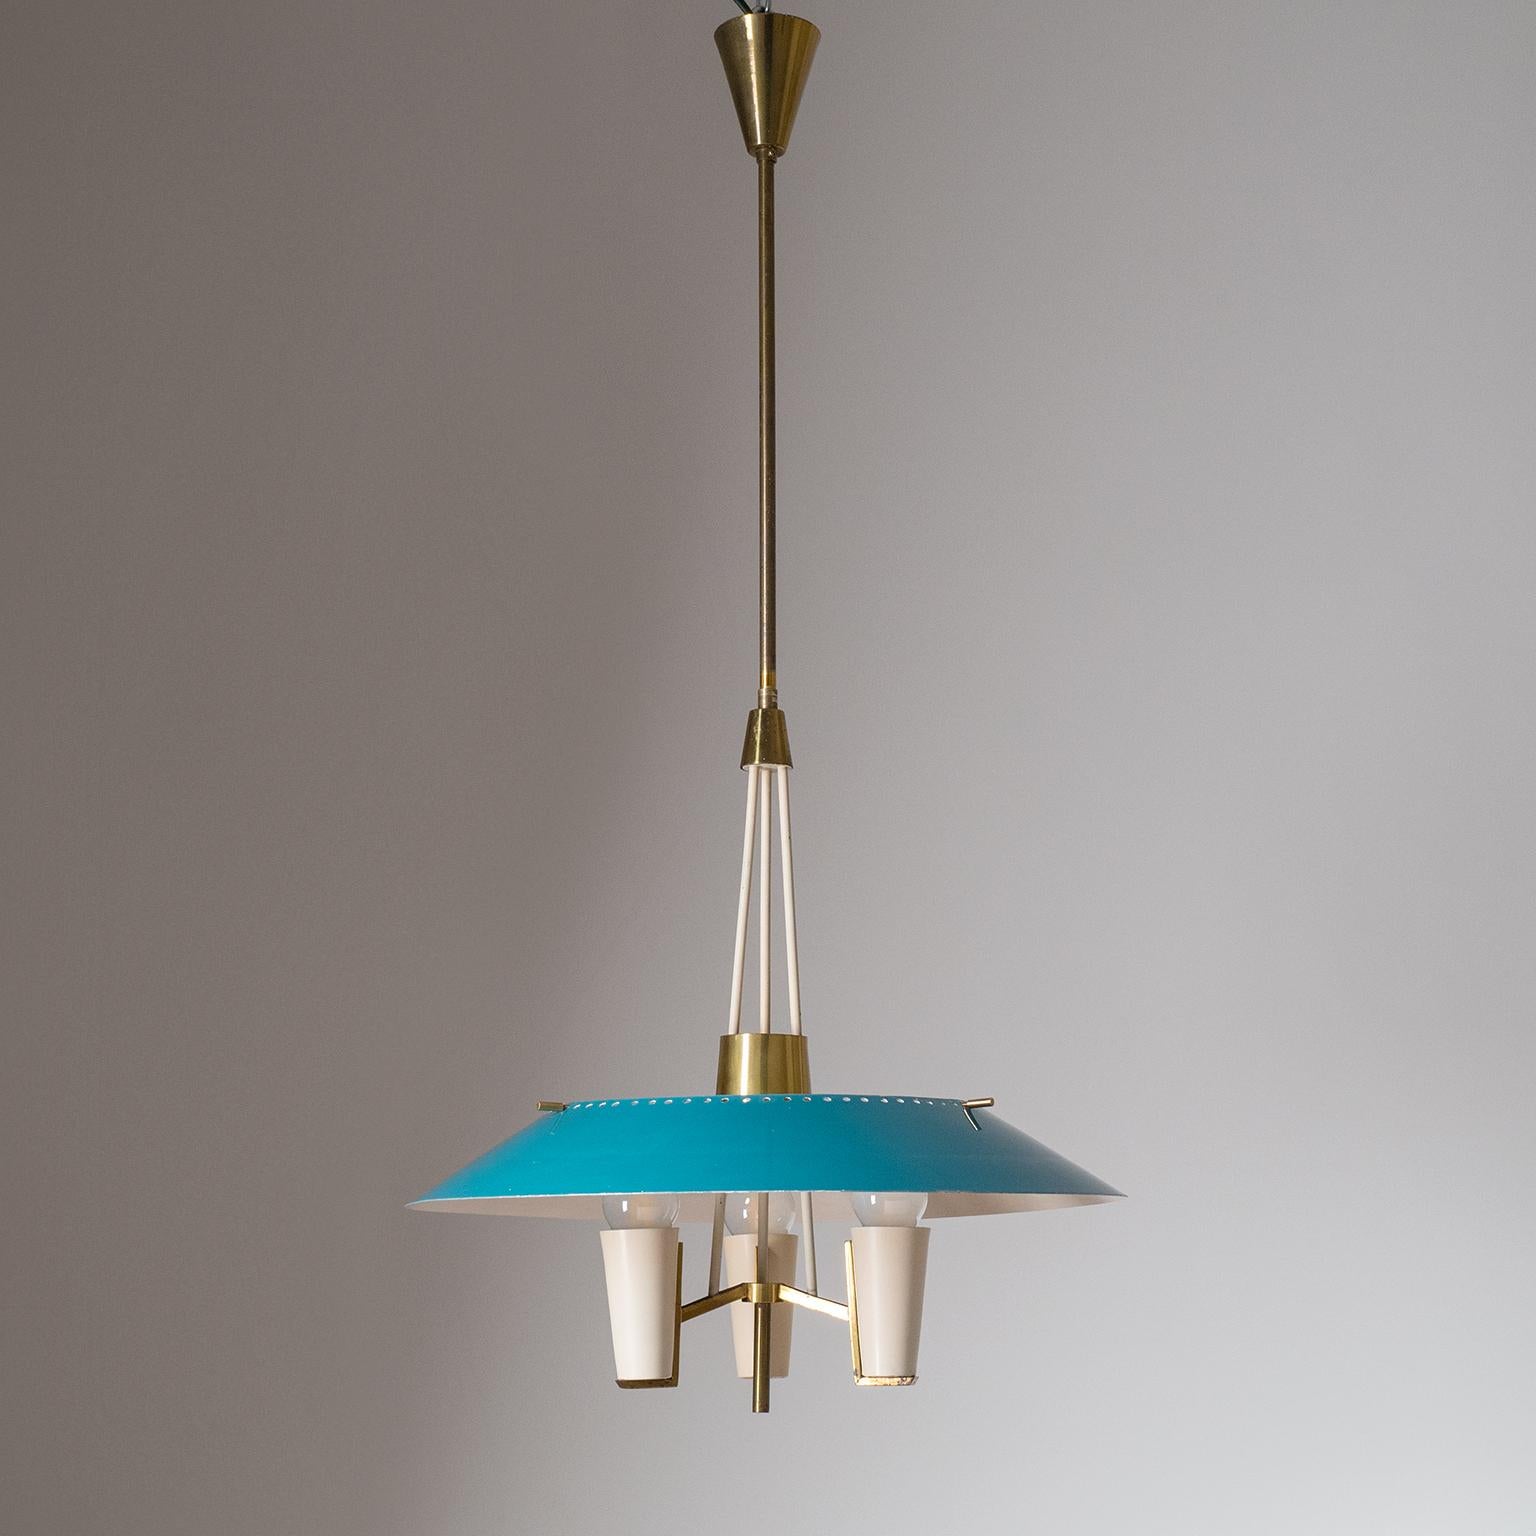 Rare modernist Italian lantern or chandelier from the 1950s. Sculptural brass structure with a large lacquered aluminum shade. Nice condition with patina on the brass and some light wear to the original lacquer. Three original brass E14 sockets with